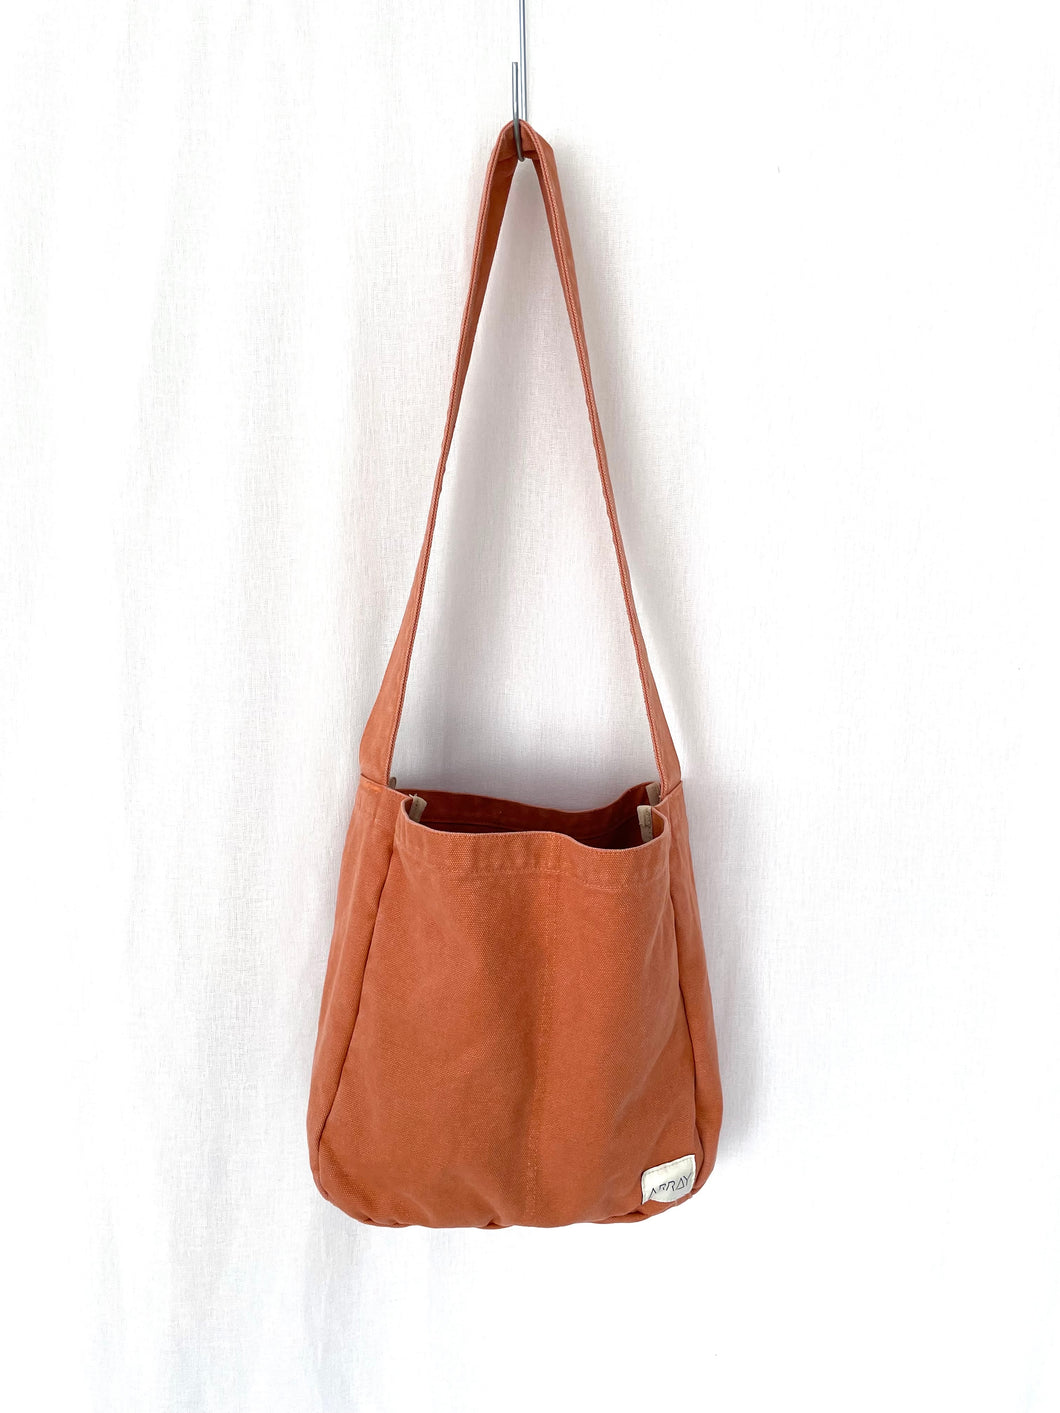 Crossbody bag with pockets, and the pockets will keep everything organised for the perfect everyday bag, work bag, or baby bag.